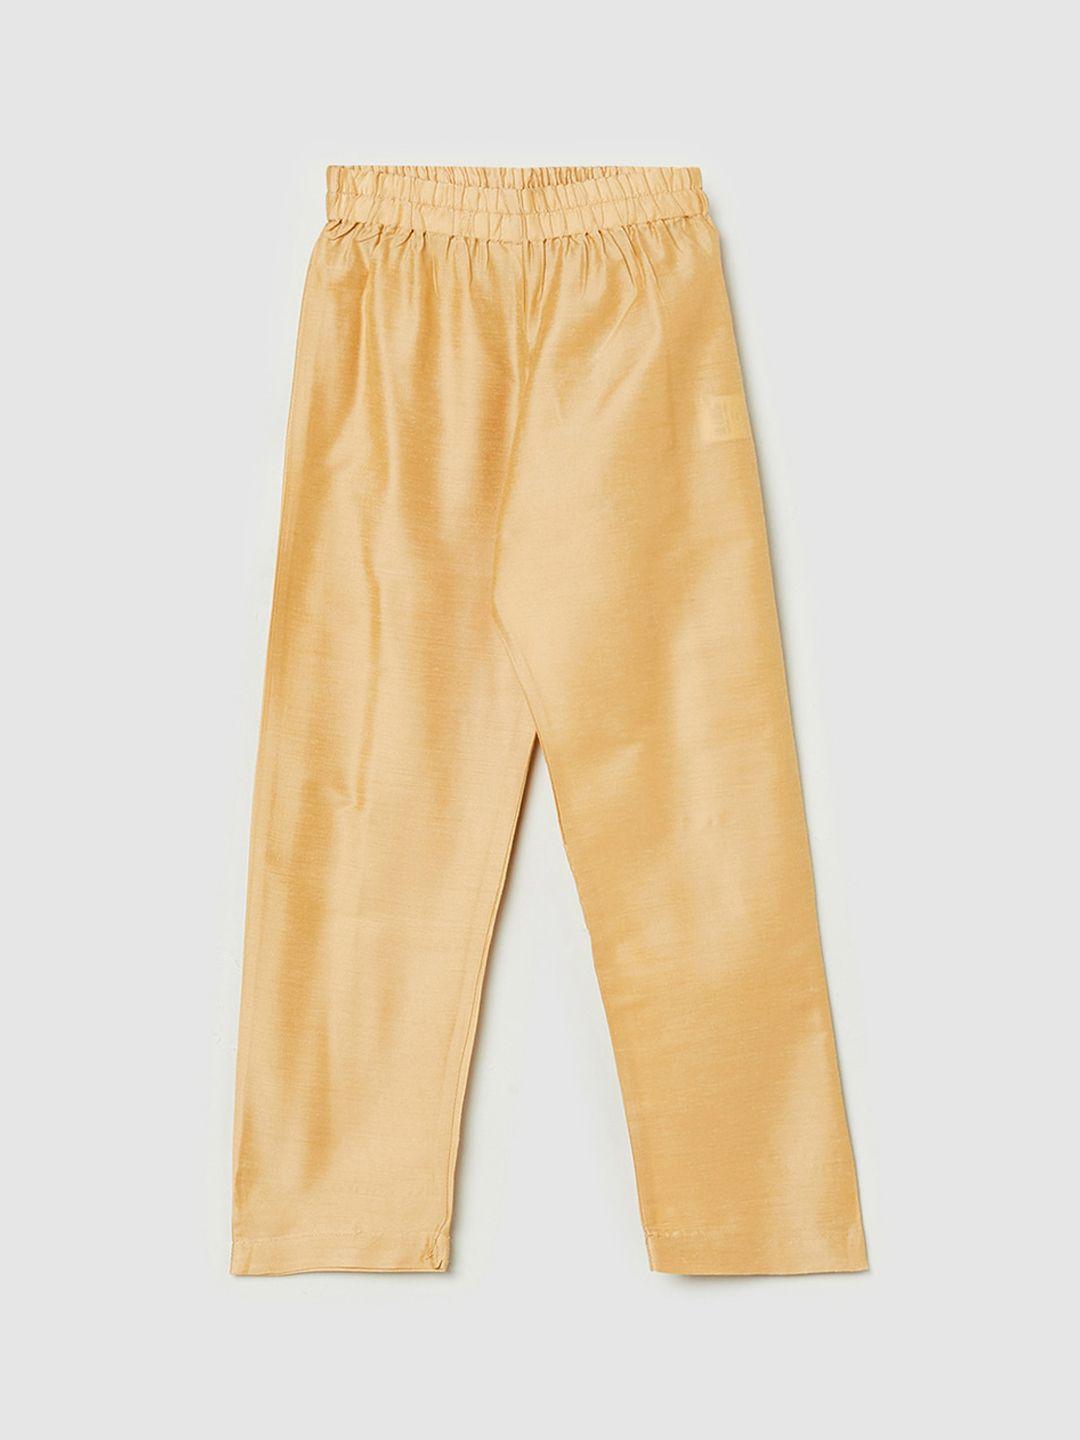 max boys gold-colored solid lounge pants